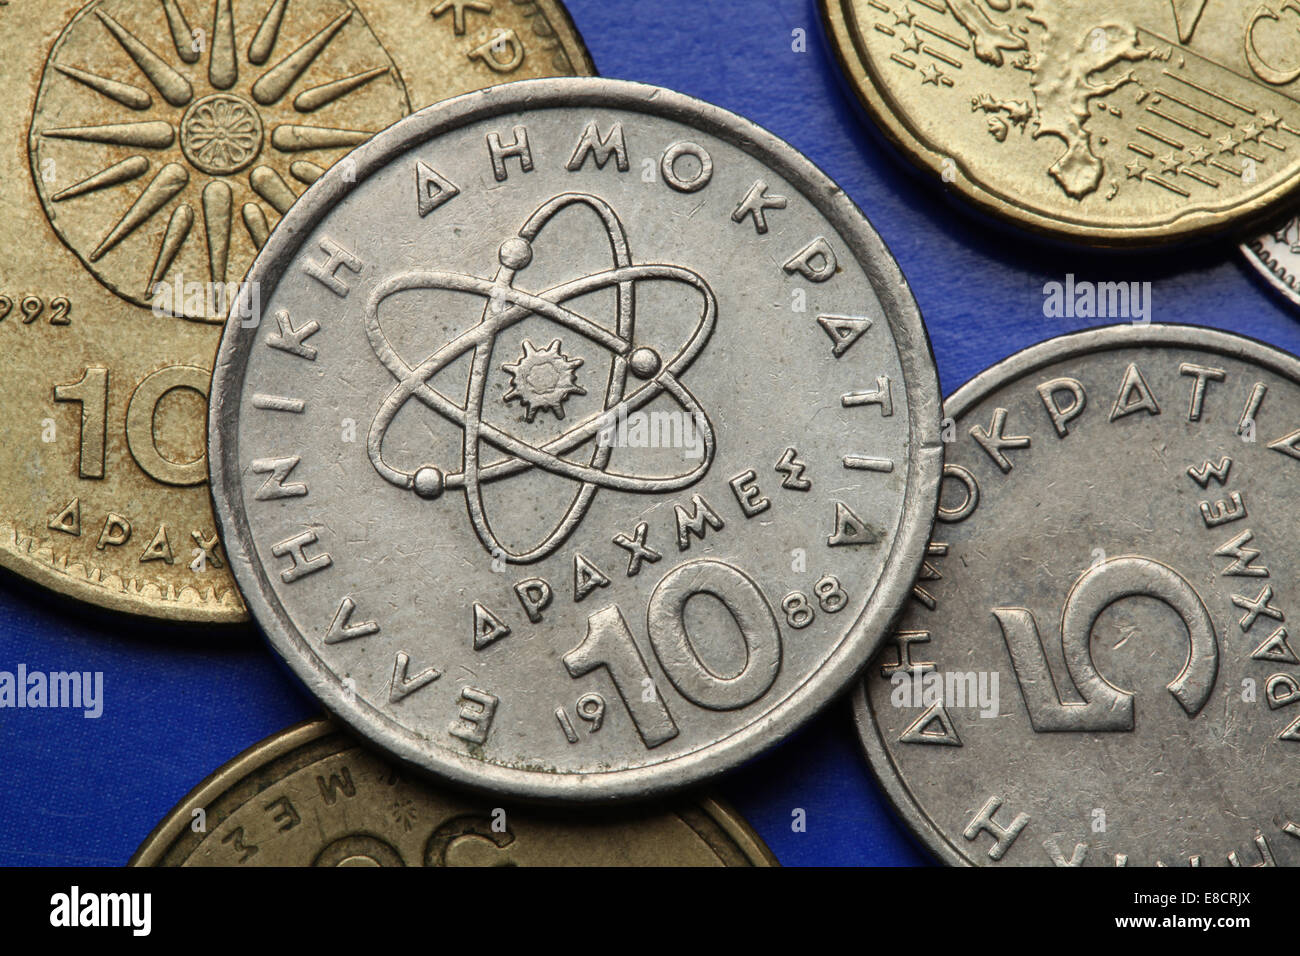 Coins of Greece. Atom, electron and neutron depicted in the old Greek 10 drachma coin. Stock Photo